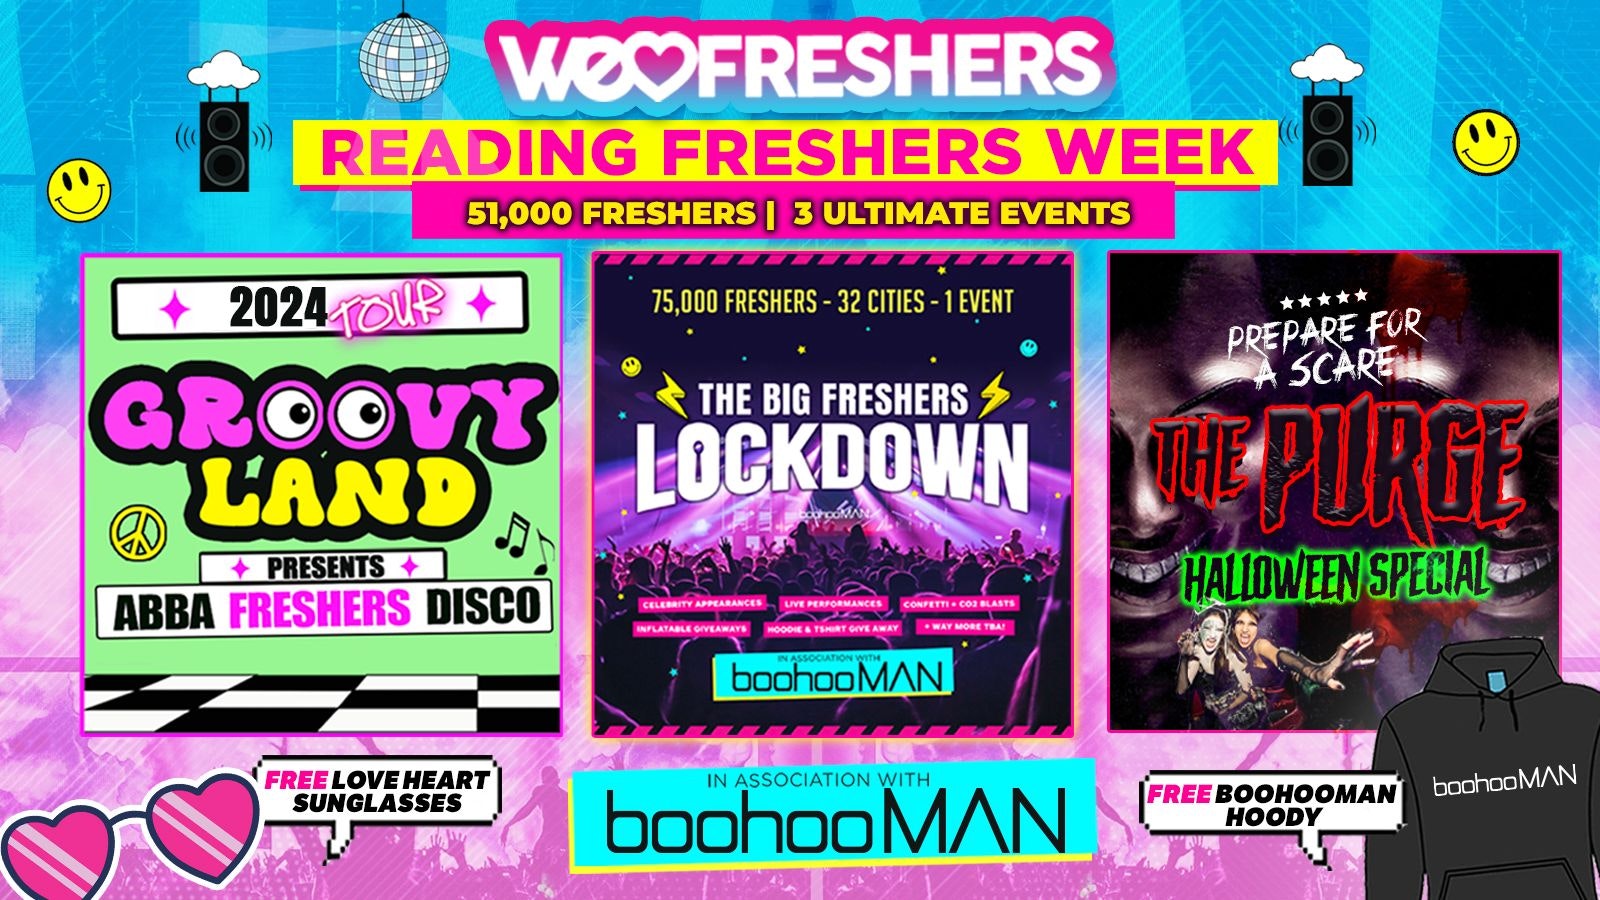 WE LOVE READING FRESHERS 2024 in association with boohooMAN ❗FREE BOOHOOMAN HOODIE TODAY ONLY❗